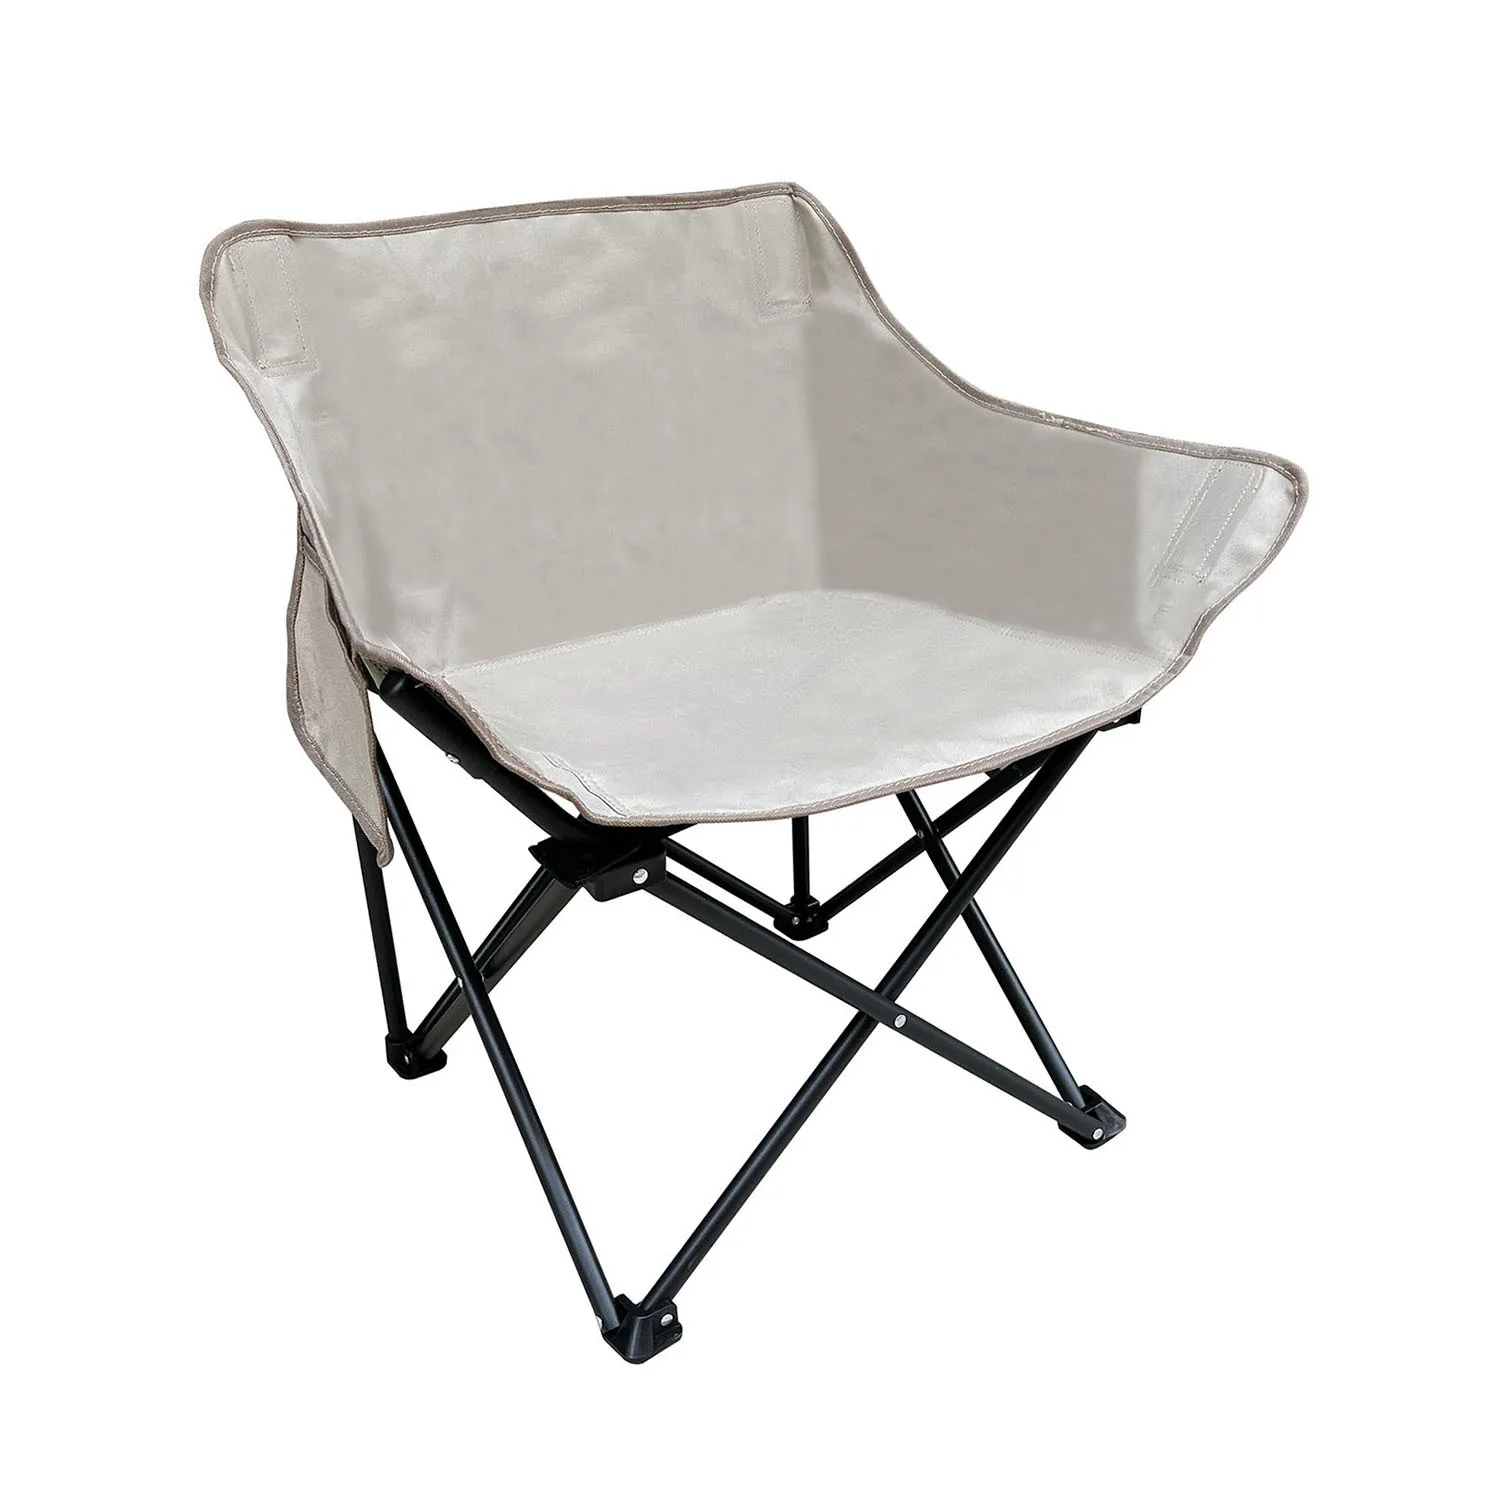 Convenient to carry foldable moon chairs for outdoor camping portable fishing - £108.39 GBP